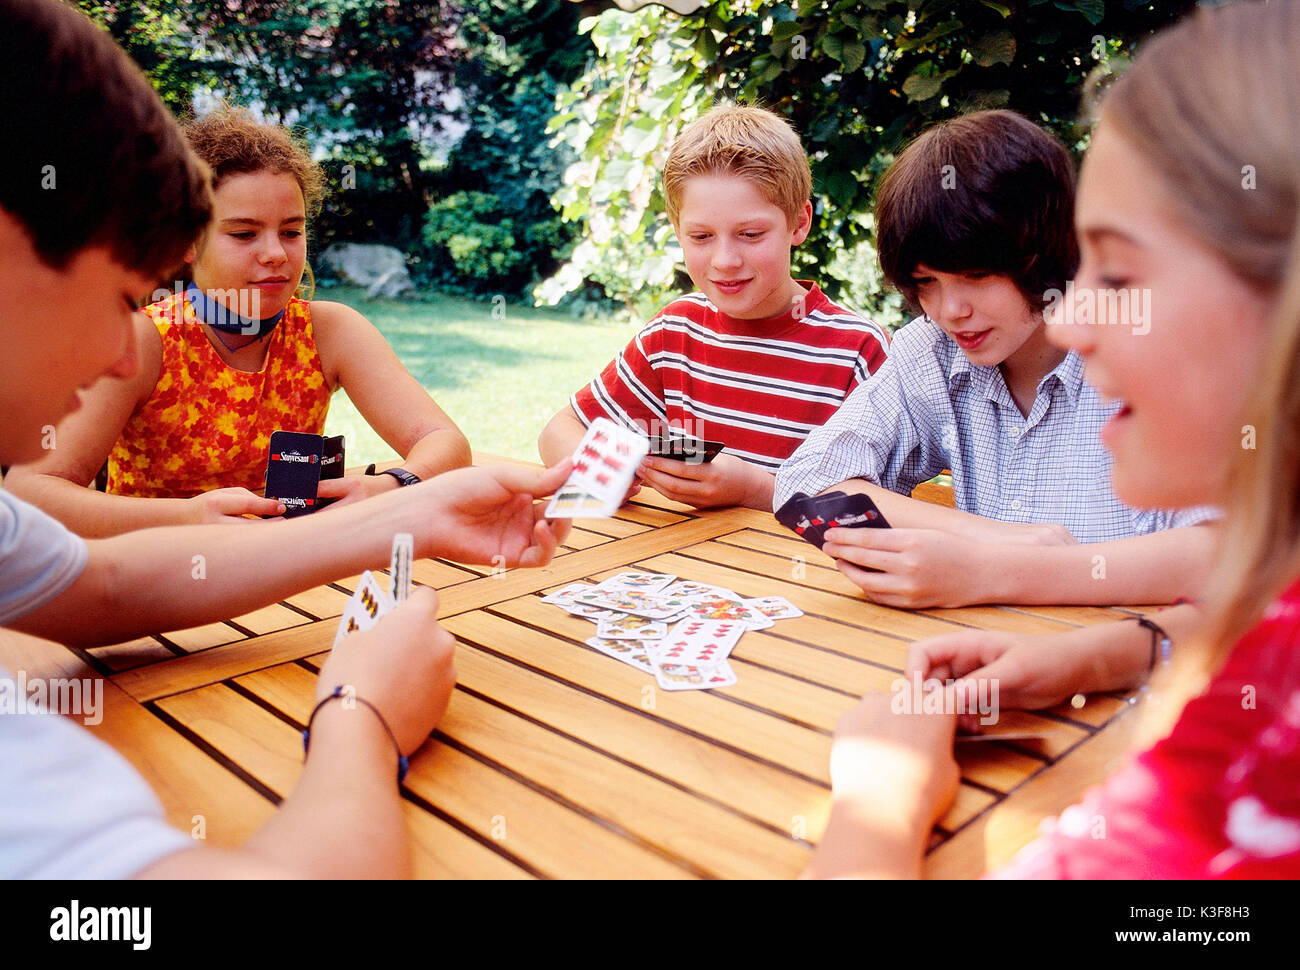 Group of children / of young persons playing cards Stock Photo